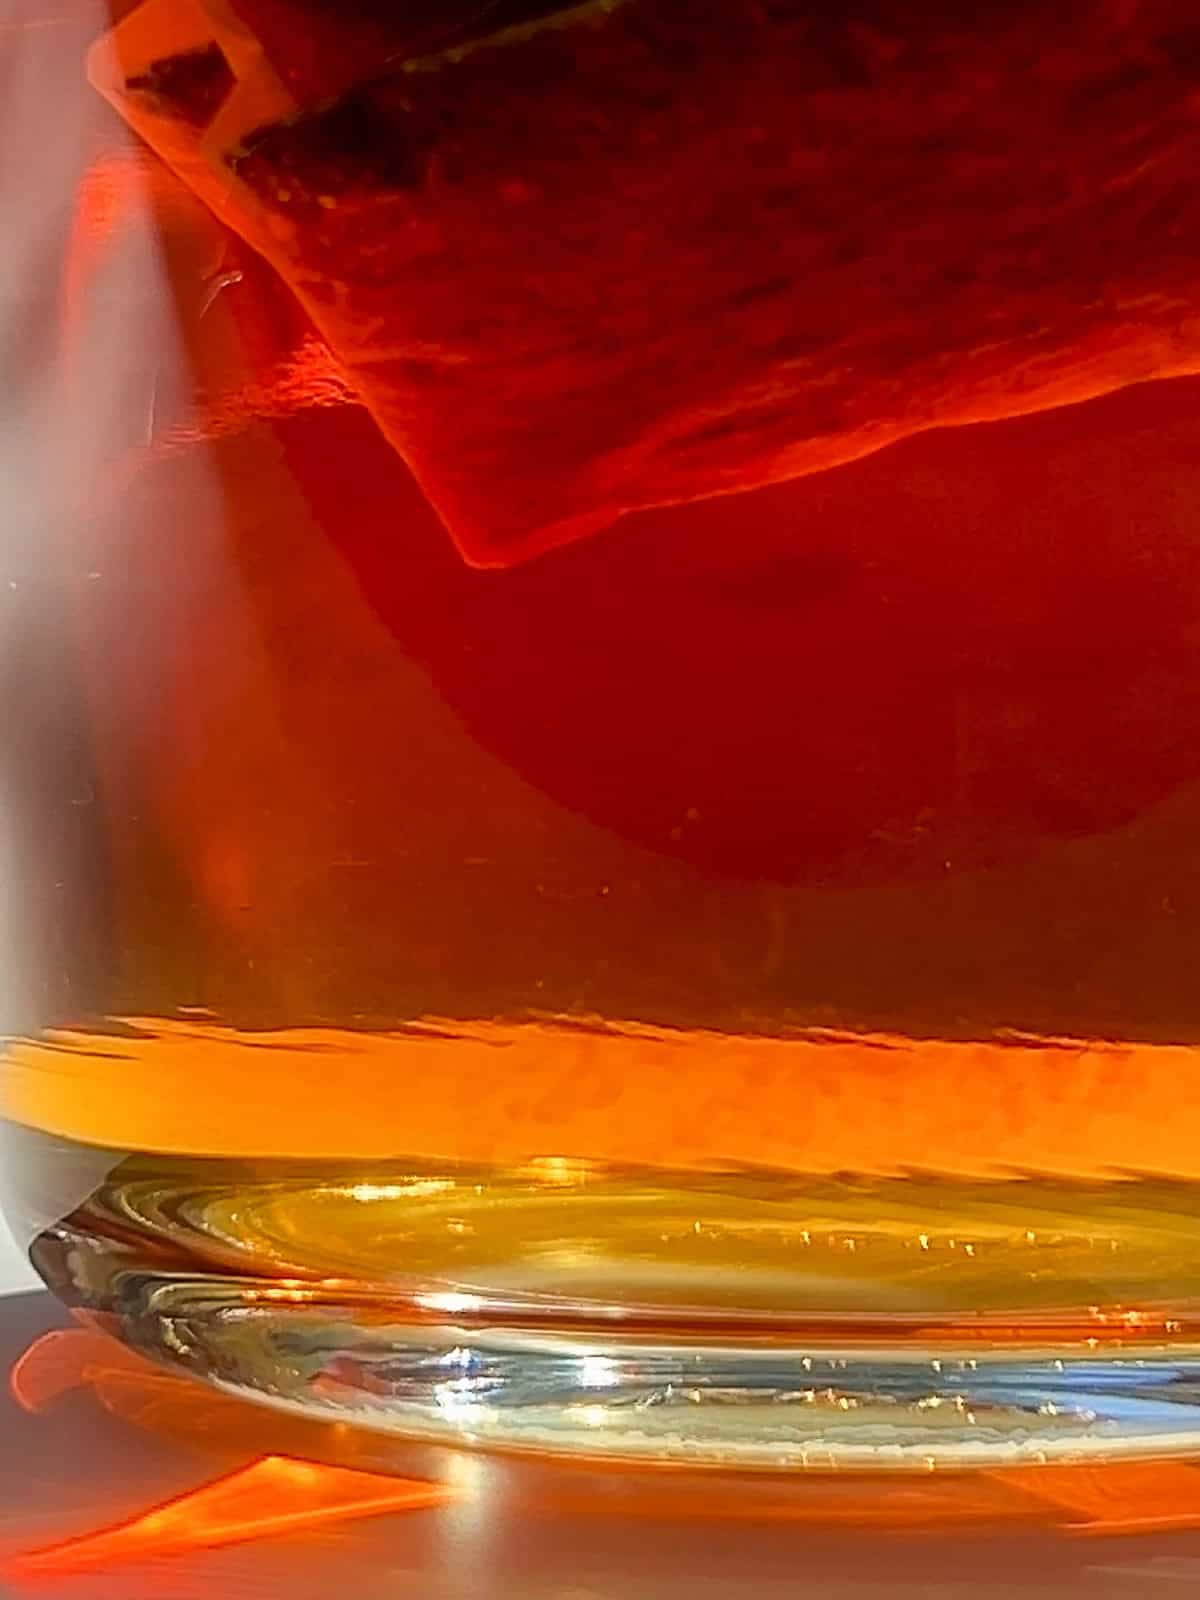 A close up image of a tea steeping.